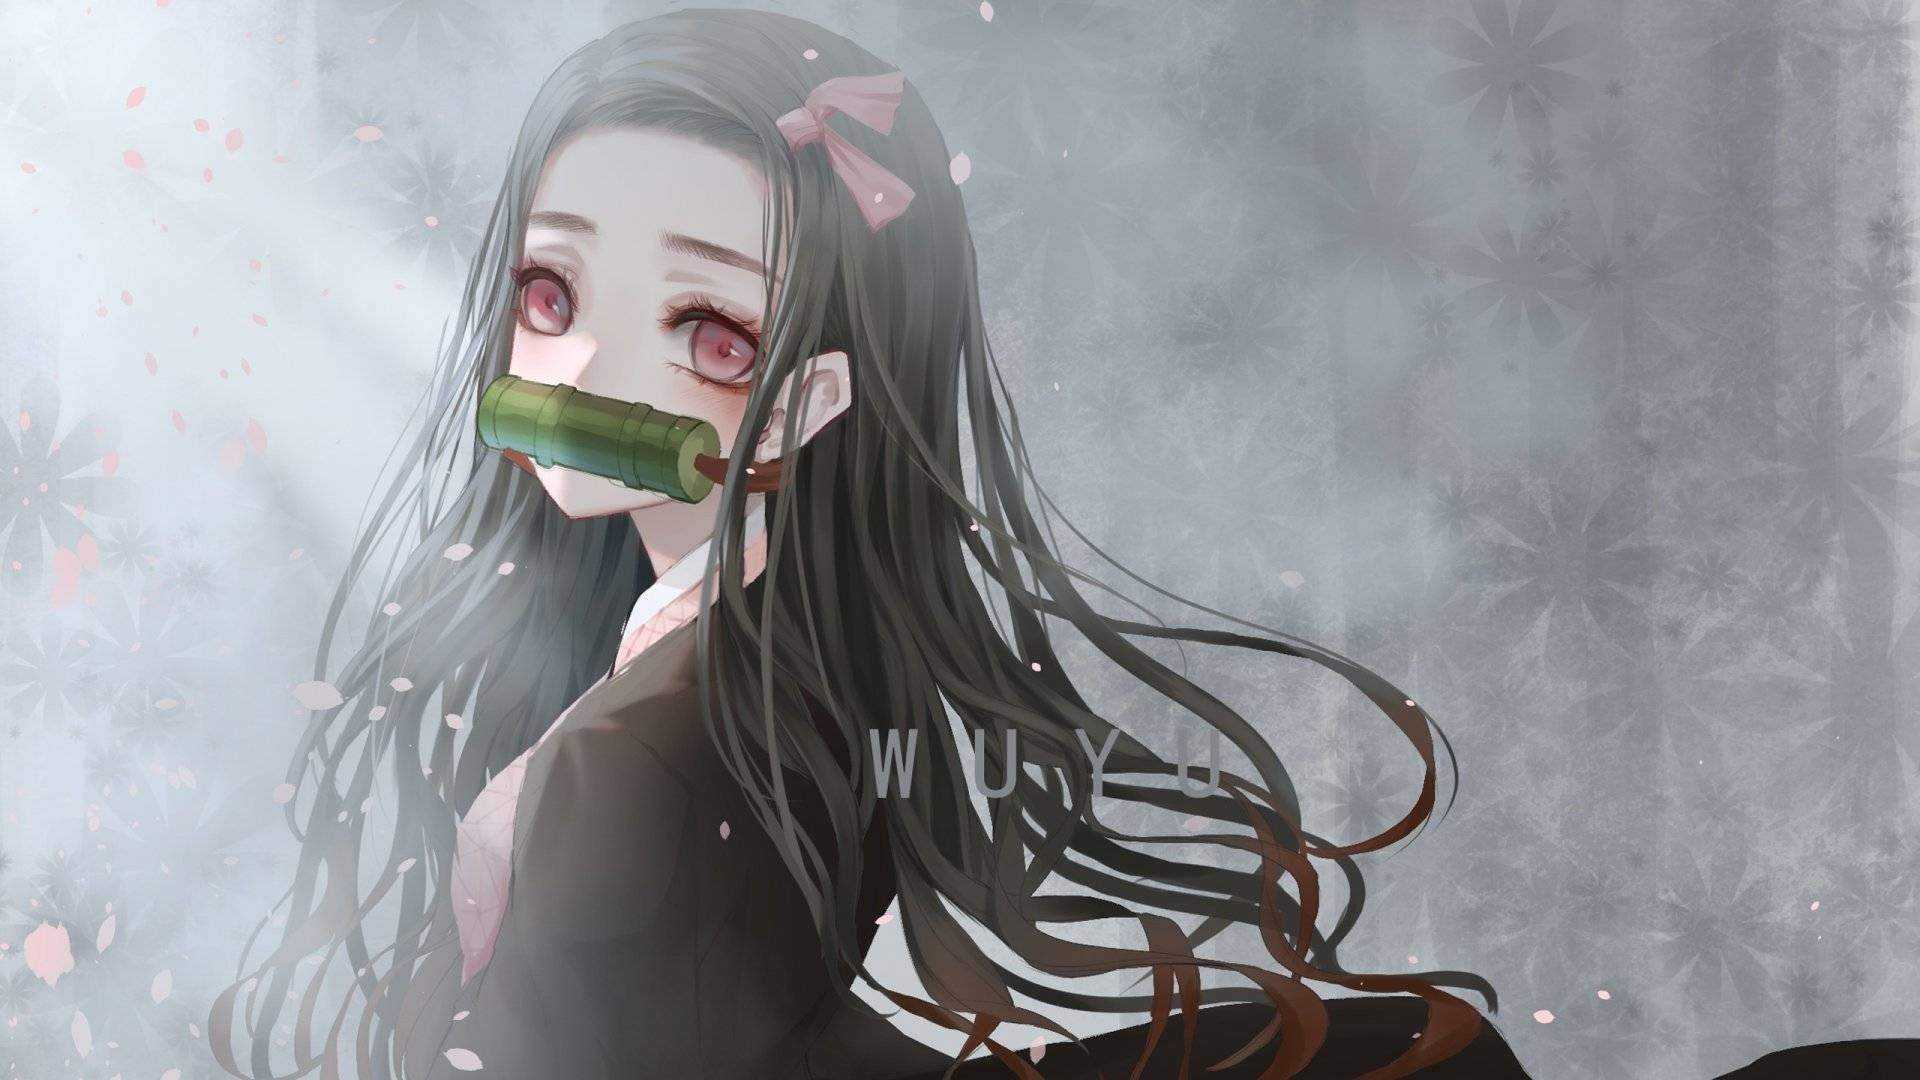 demon_slayer_nezuko_kamado_with_long_hair_and_pink_eyes_with_background_of_gray_abstract_hd_an...jpg